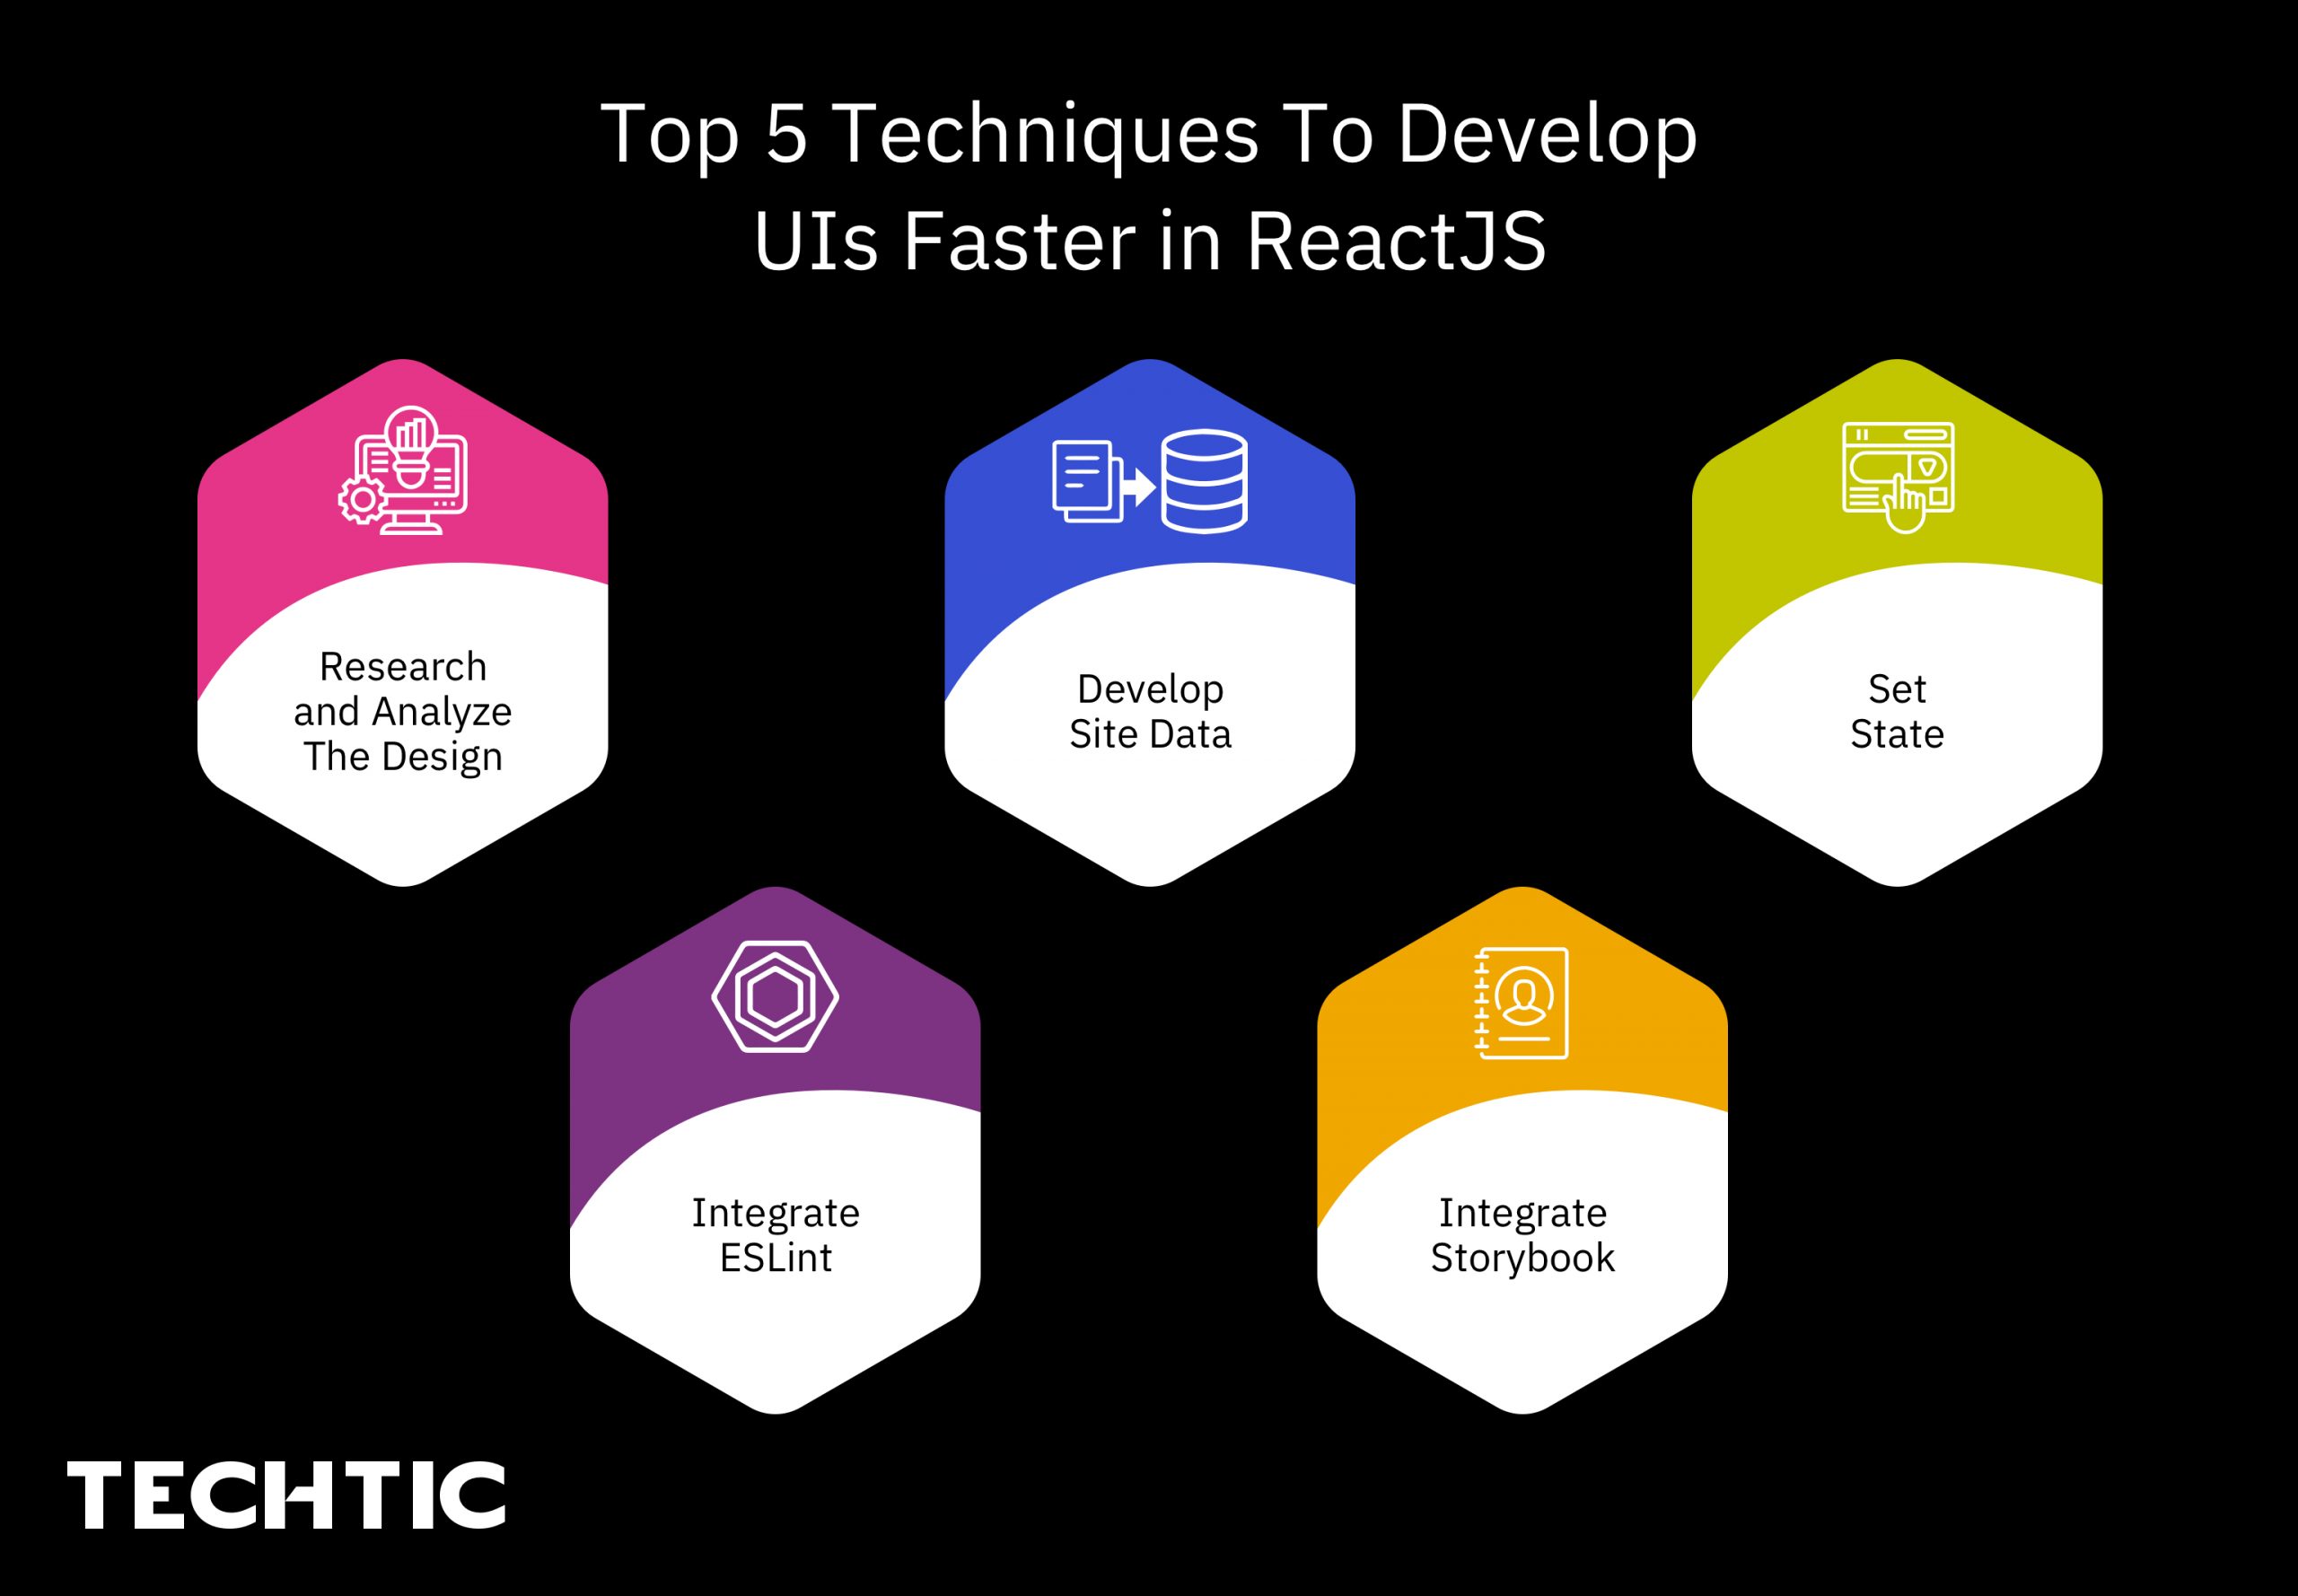 Top 5 Techniques To Develop UIs Faster in ReactJS